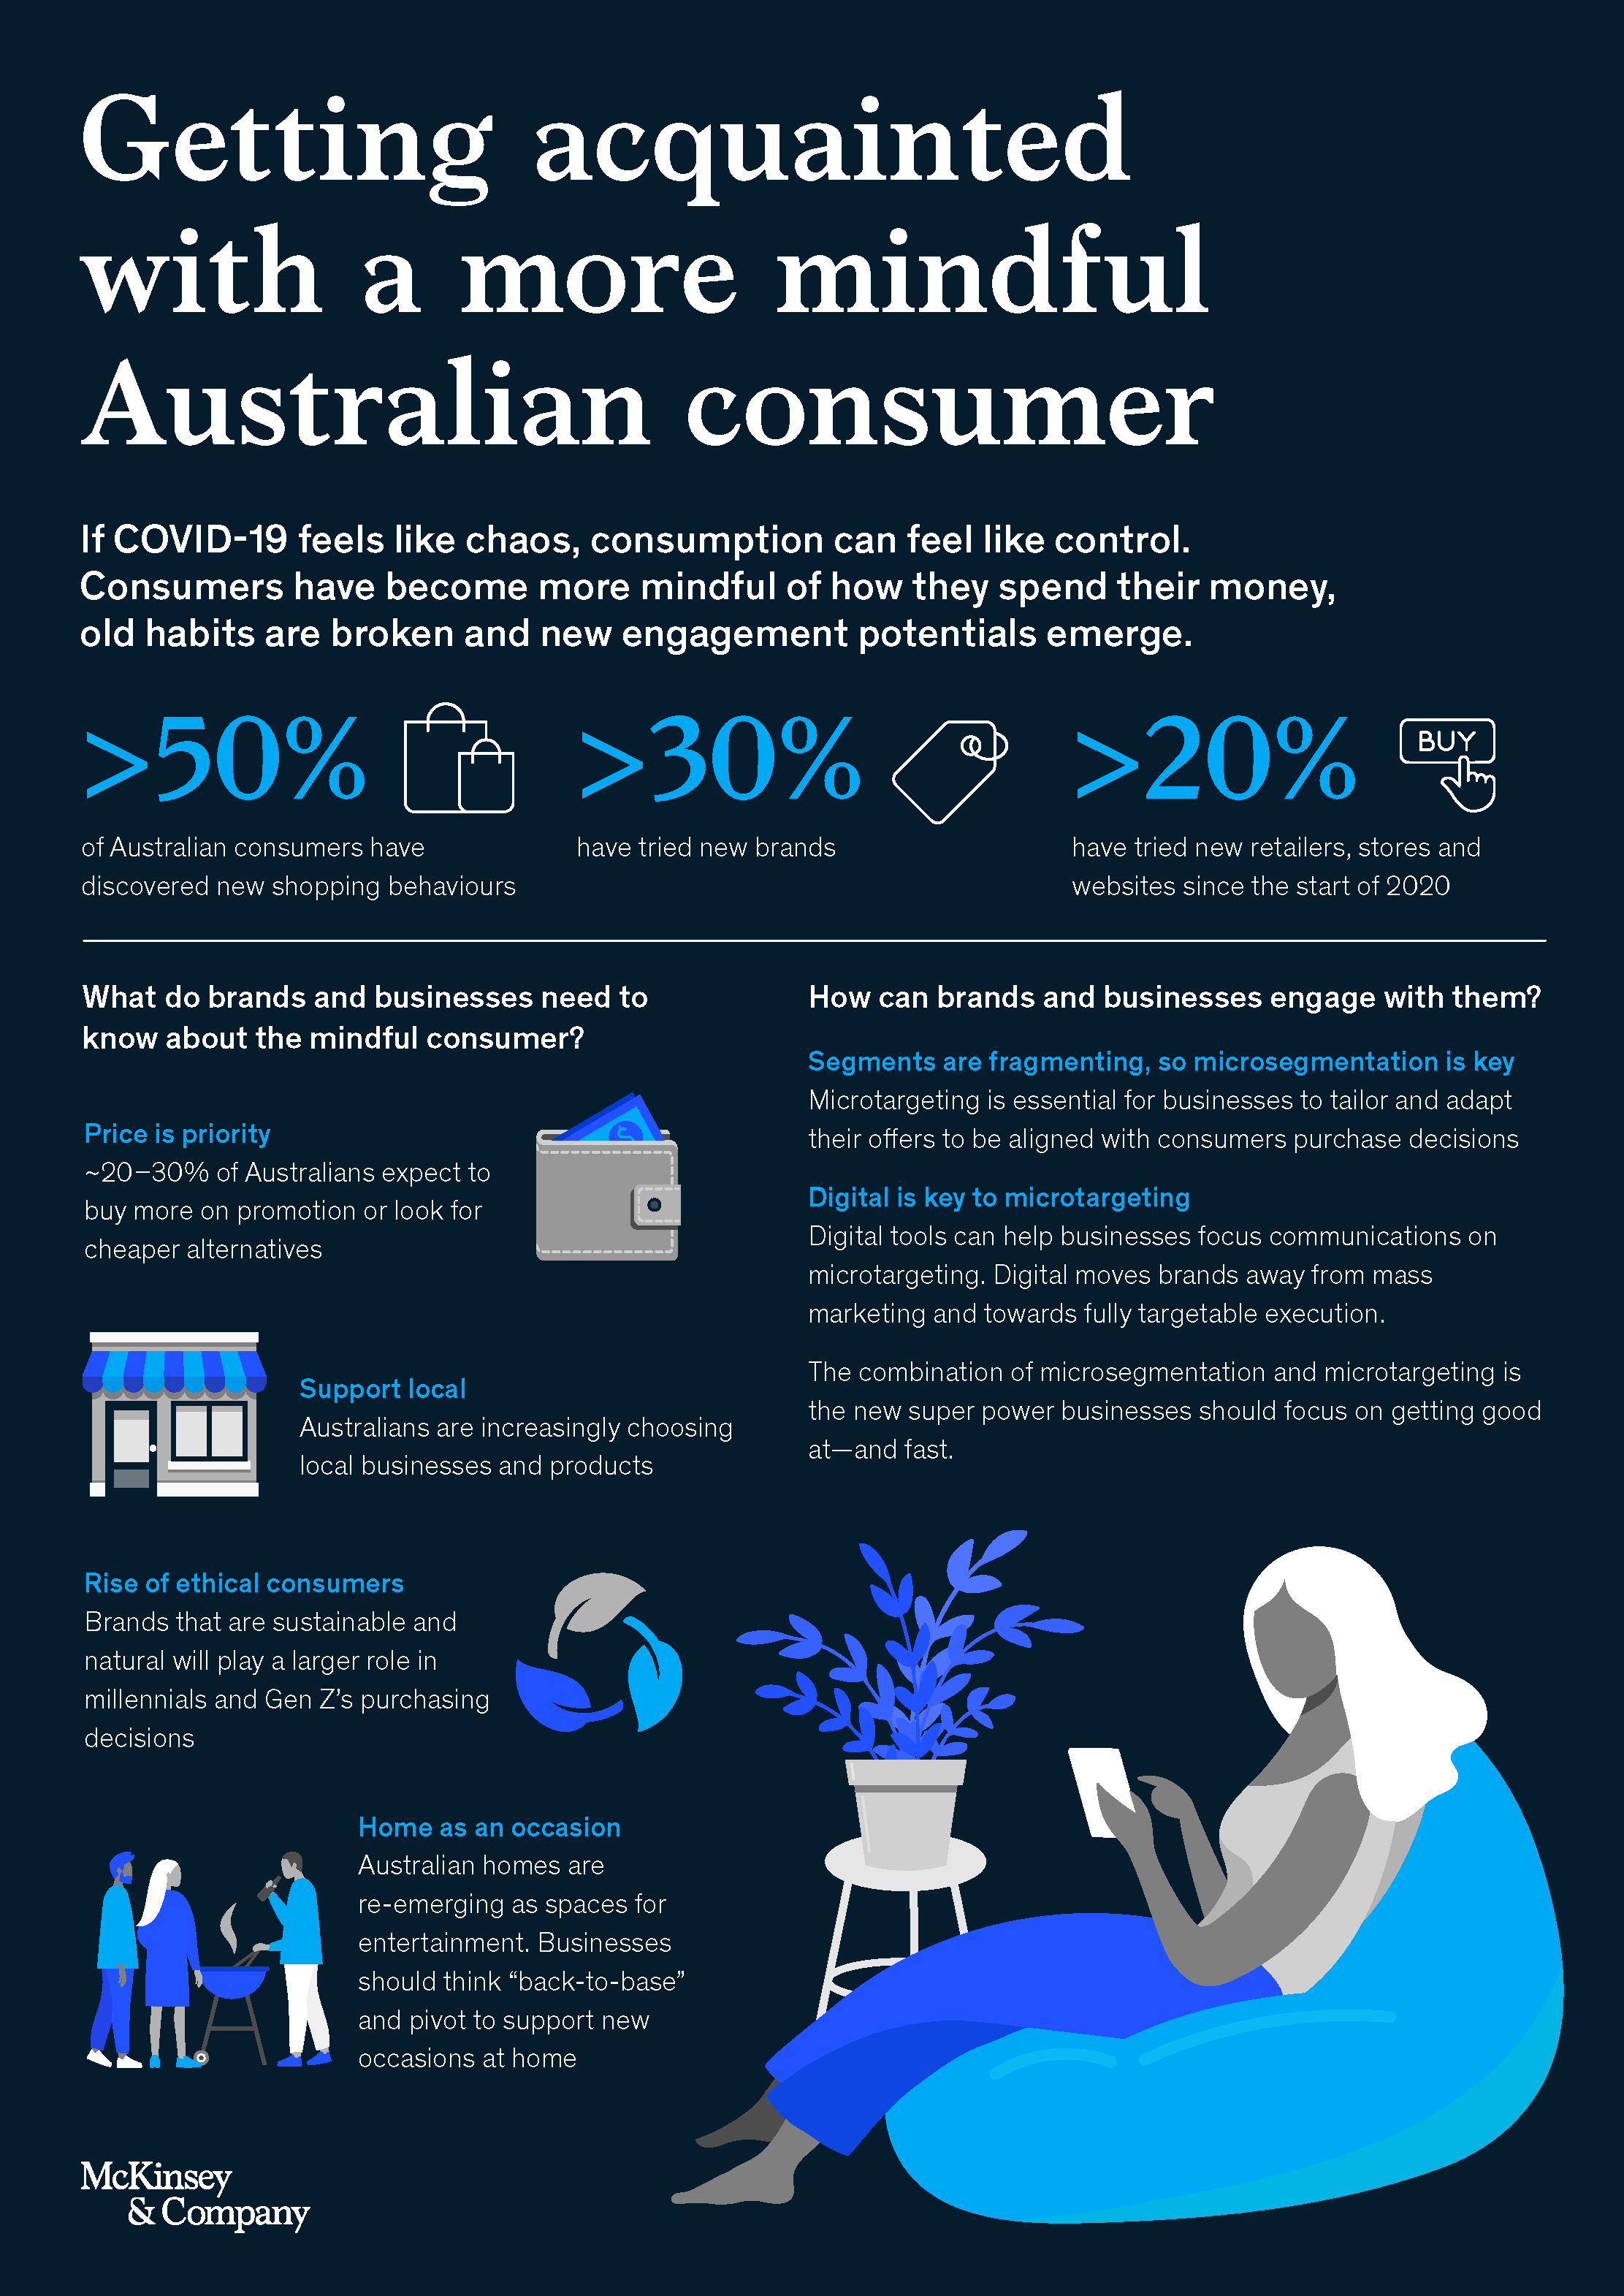 Getting acquainted with a more mindful Australian consumer